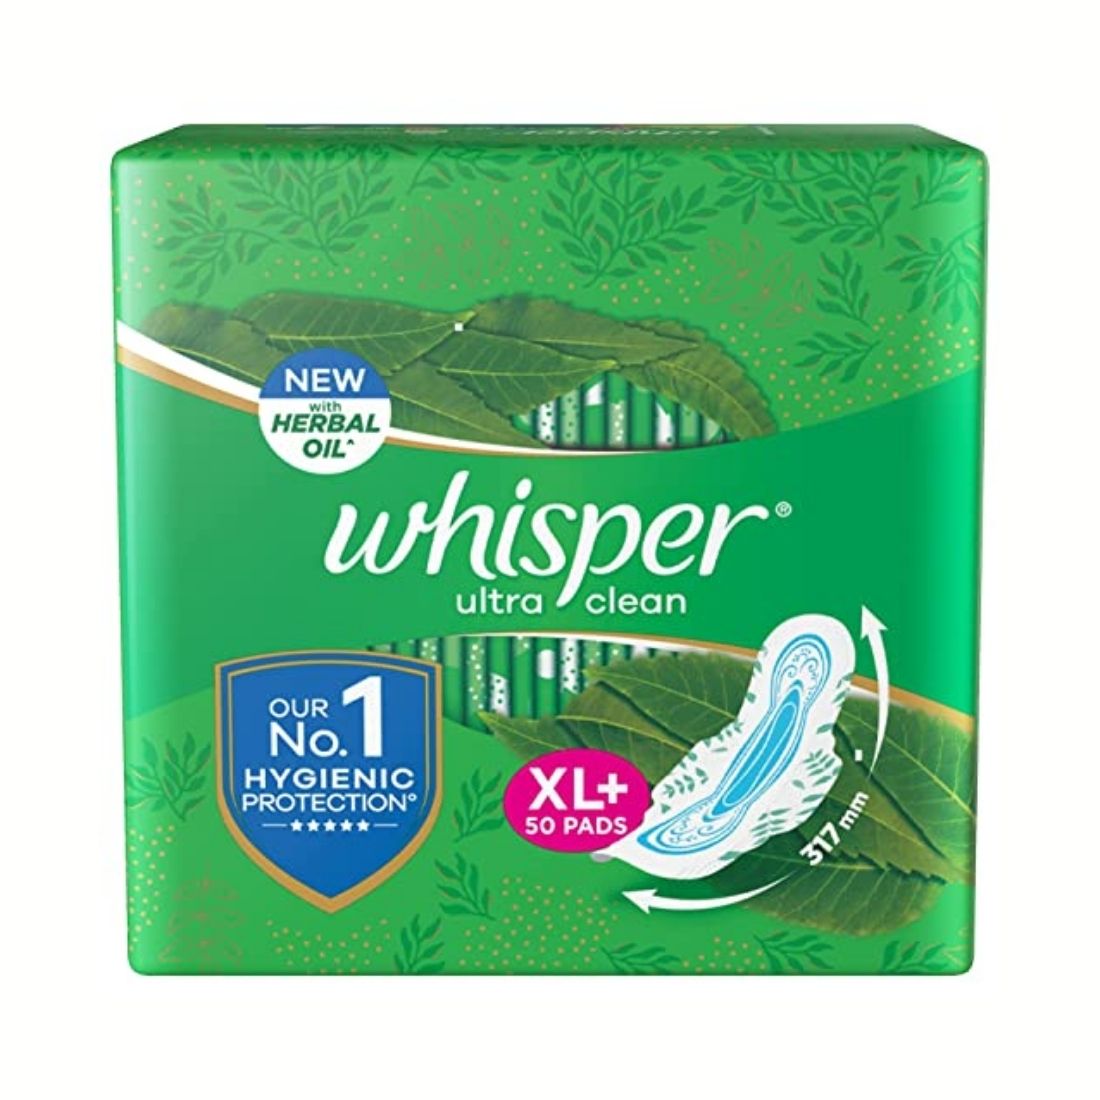 Buy Whisper ultra clean it is designed to keep odour in as well, which, in turn, leaves you feeling fresh.